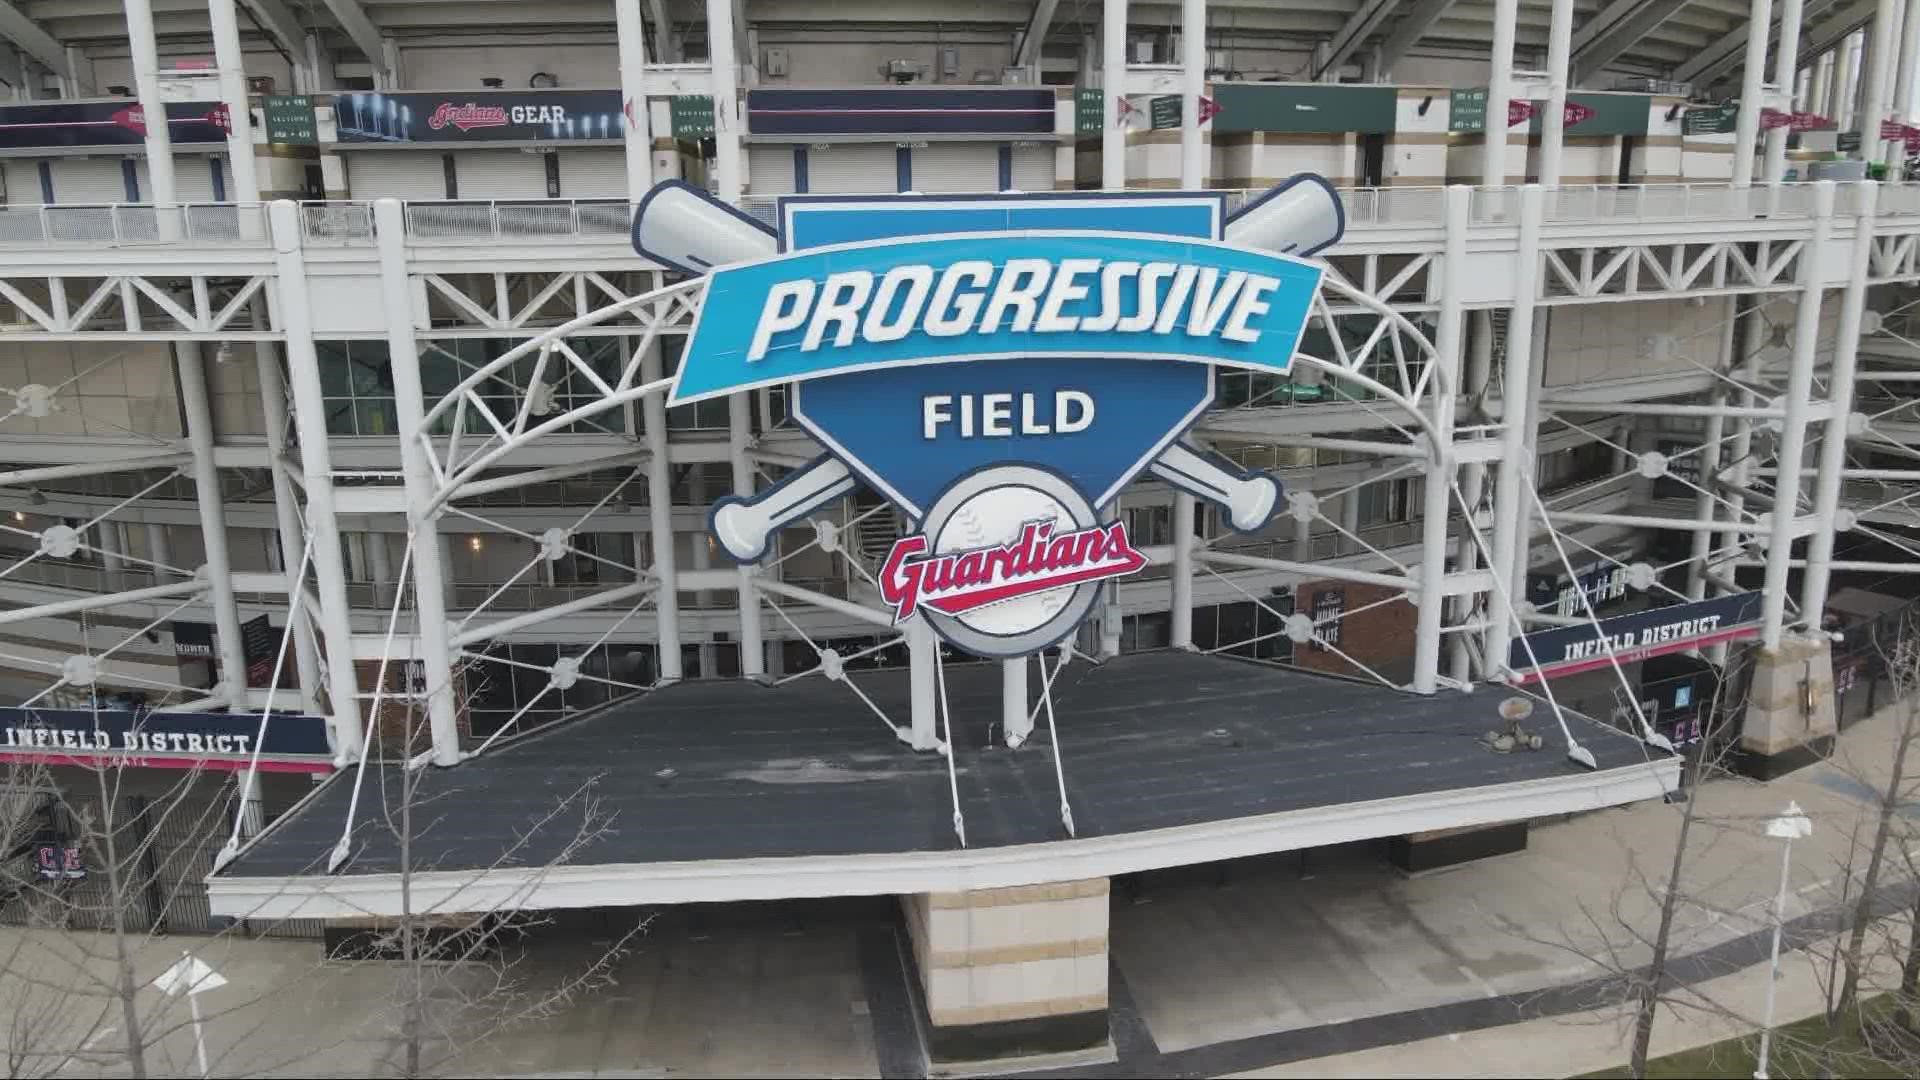 The Cleveland Guardians announced today the second annual "Grand Slam Beerfest" event for two sessions at Progressive Field on Saturday, July 9, 2022.